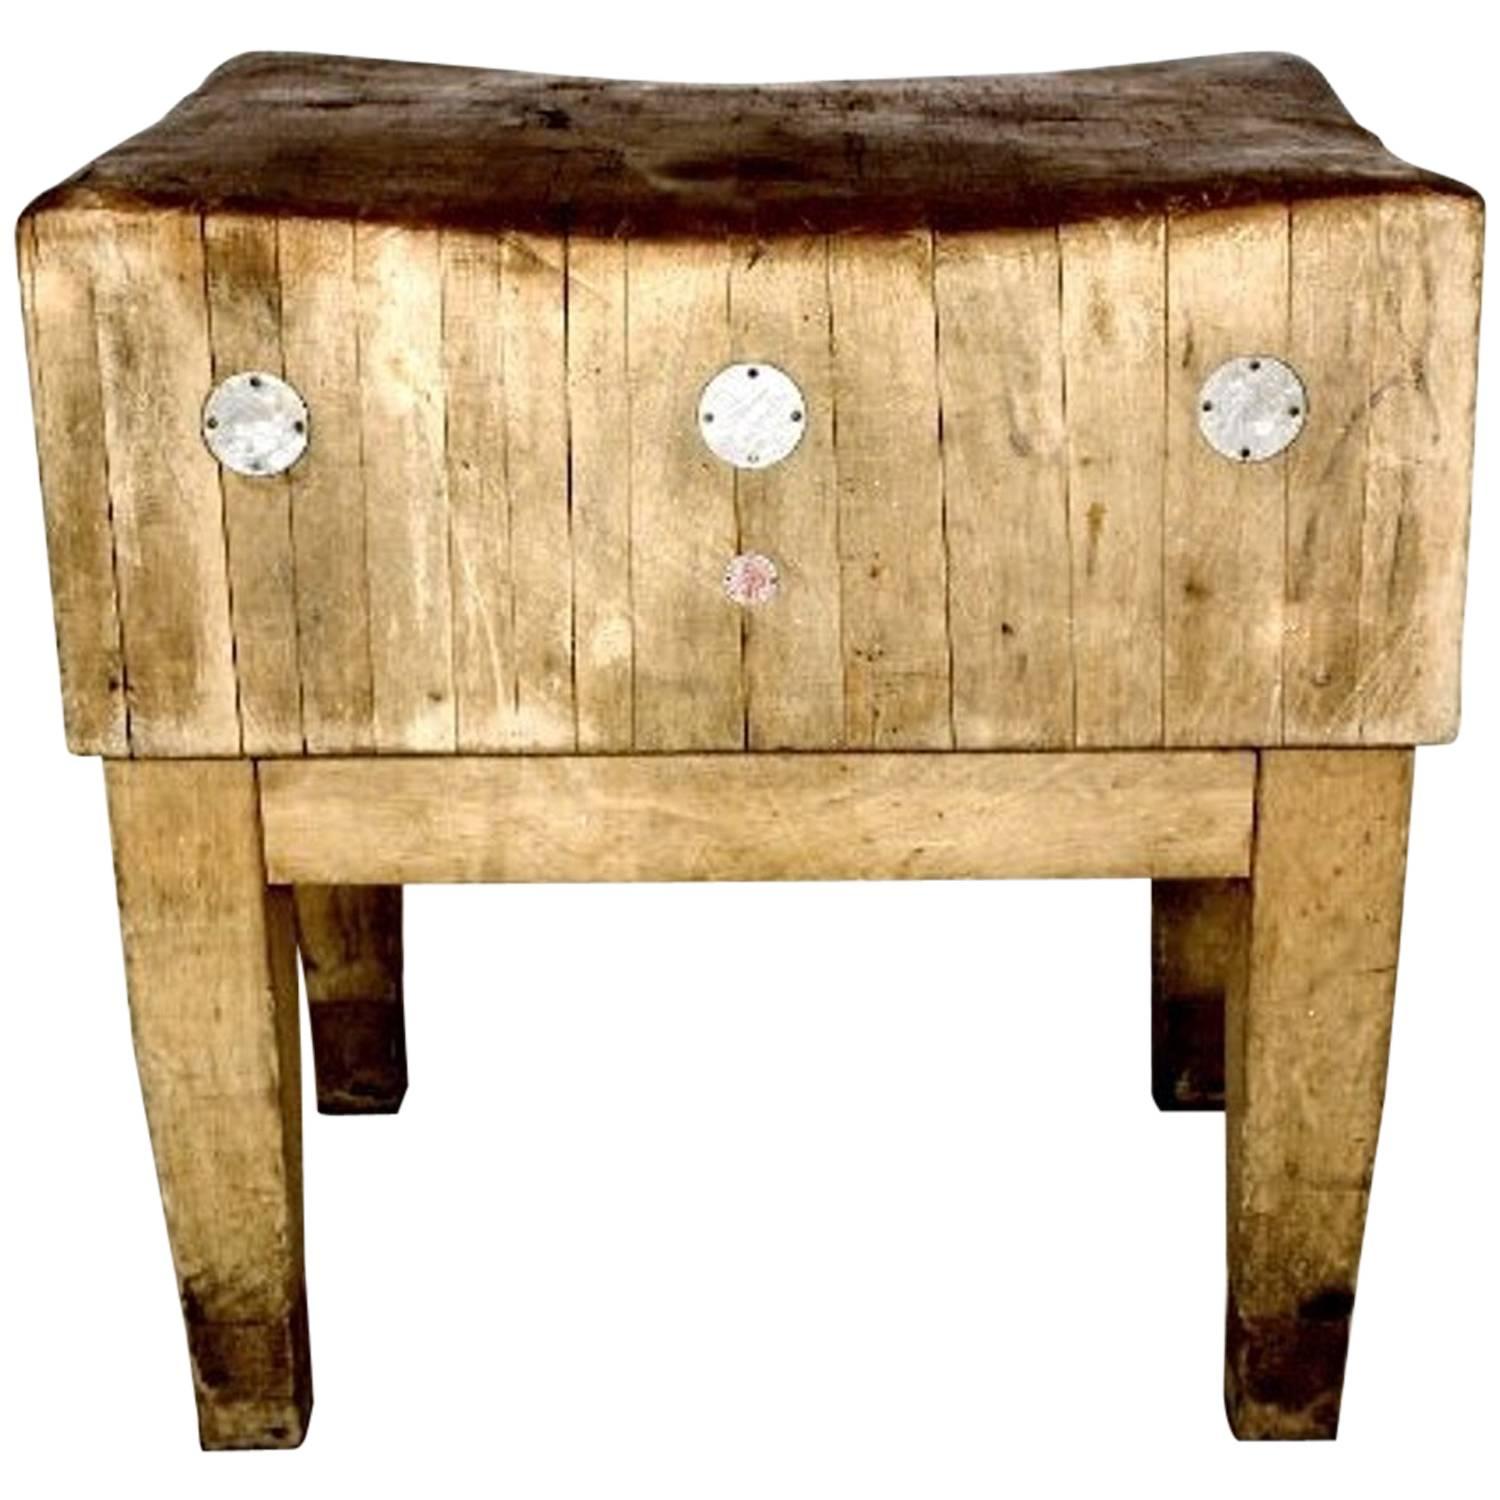 Scandinavian Vintage Butchers Block with a Rich Distressed and Worn Finish